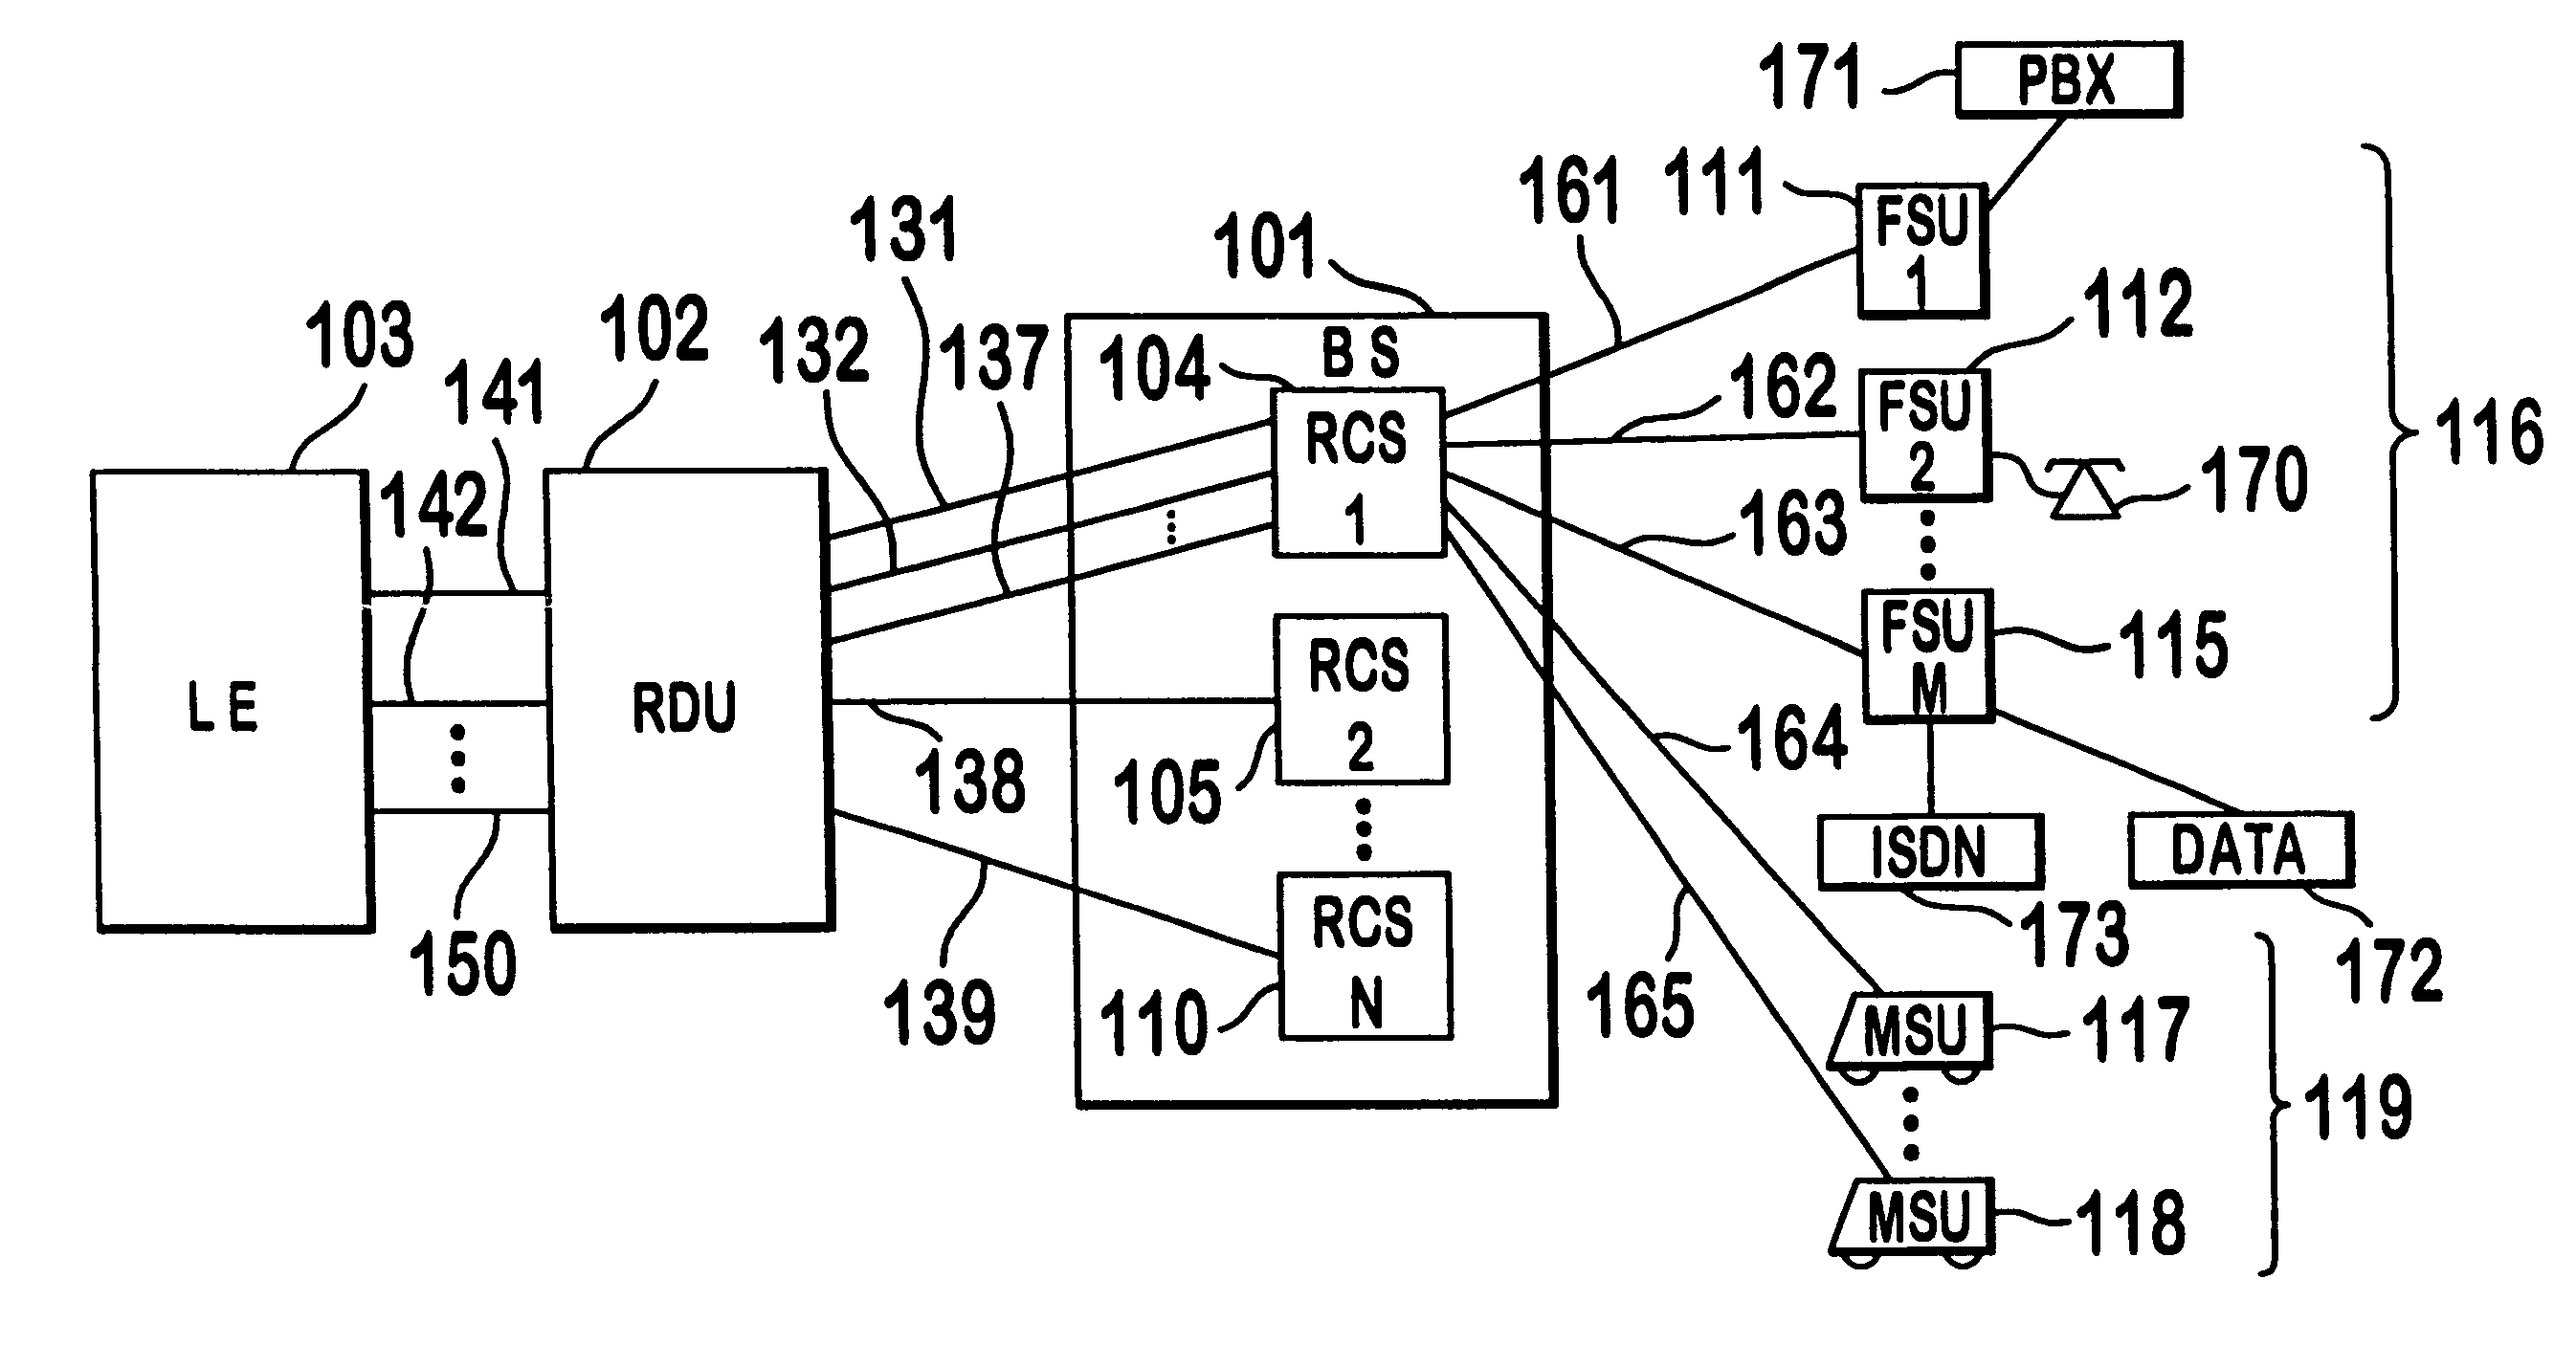 Capacity management method for a code division multiple access (CDMA) communication system